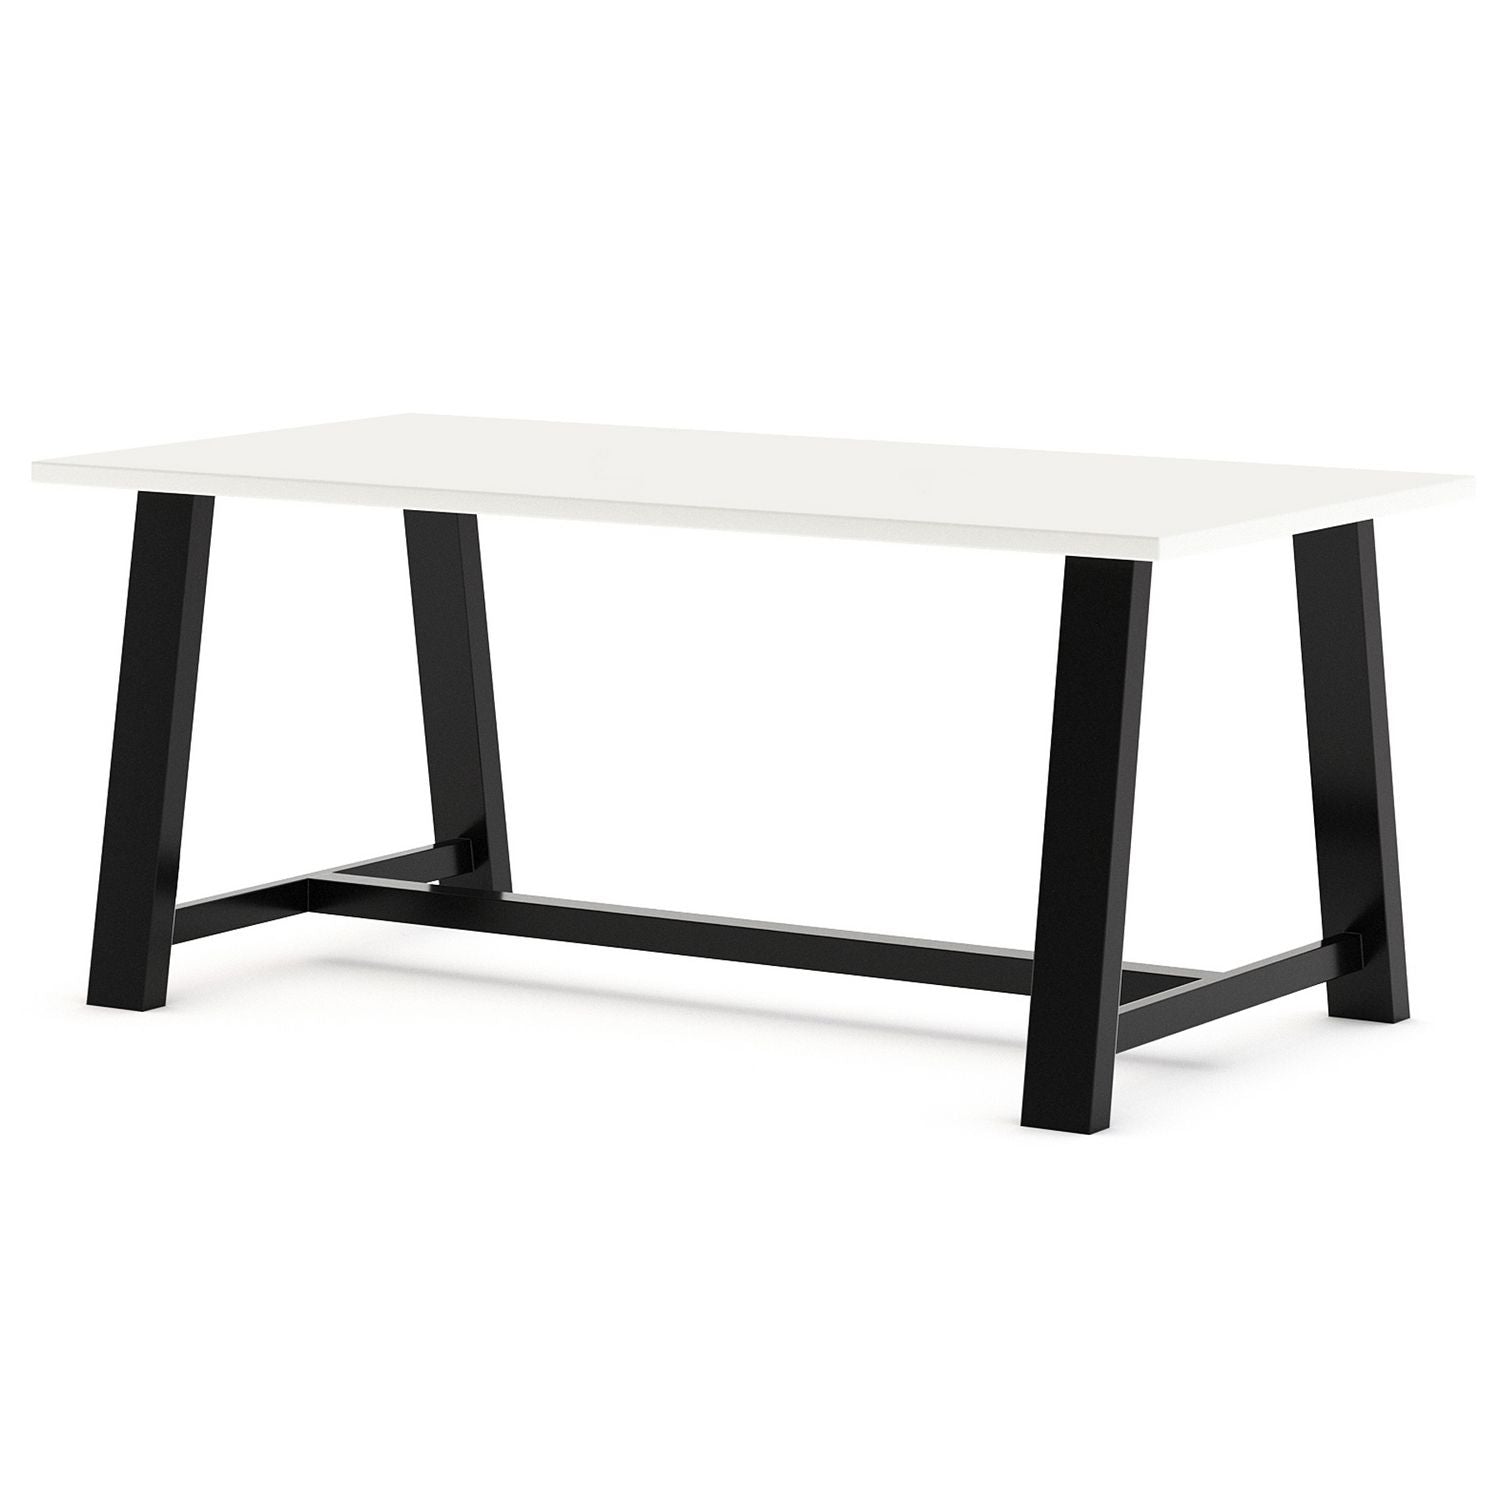 midtown-bistro-dining-table-with-four-navy-kool-barstools-36-x-72-x-41-designer-white-ships-in-4-6-business-days_kfi840031900548 - 4